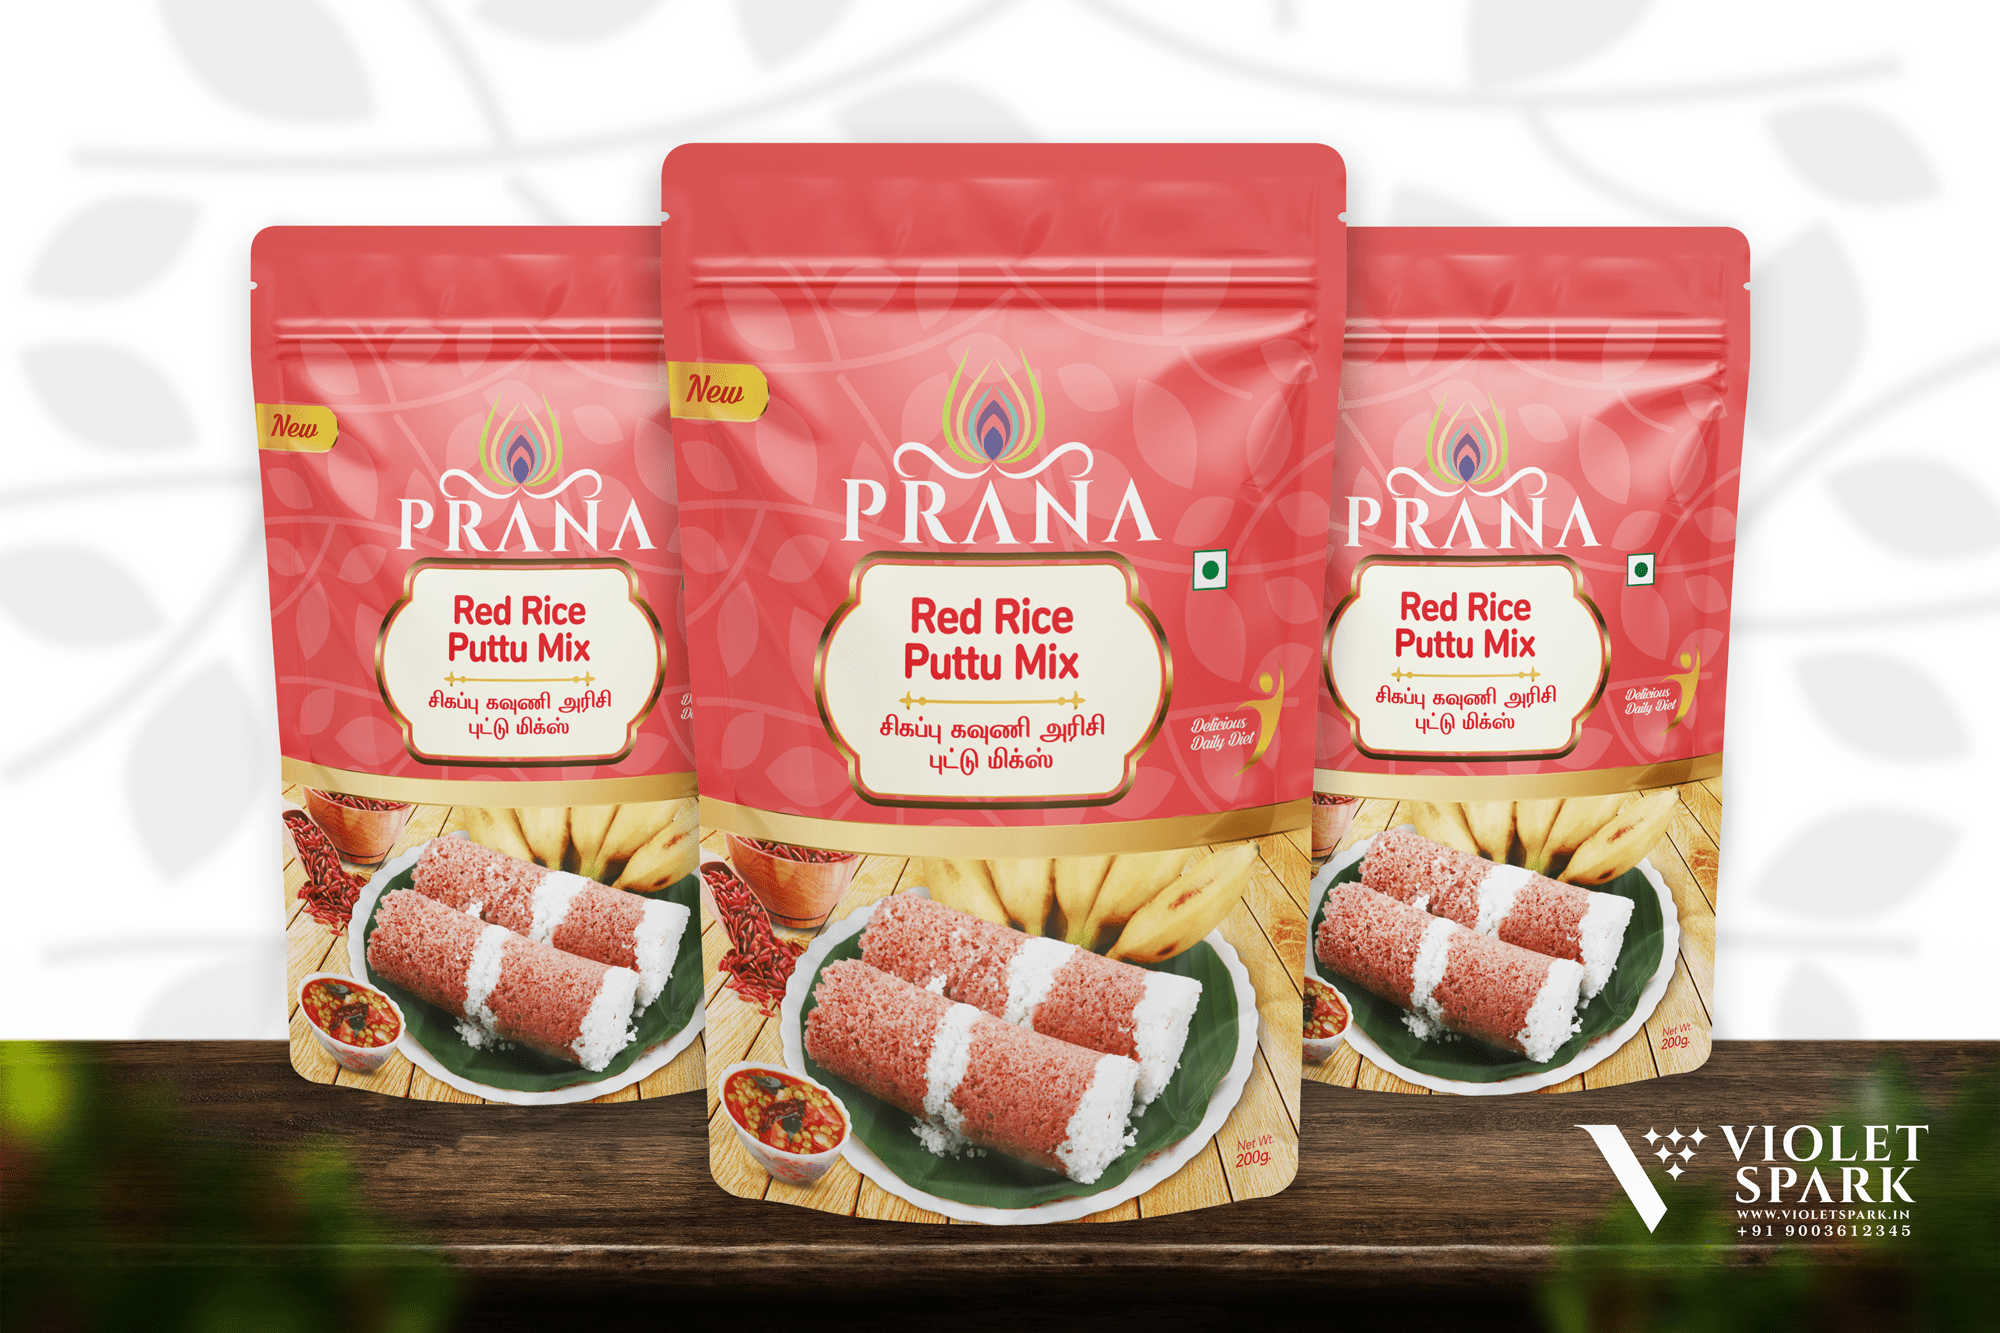 Prana Red Rice Puttu Mix Graphic Design, Branding Packaging Design in Bangalore by Creative Prints thecreativeprints